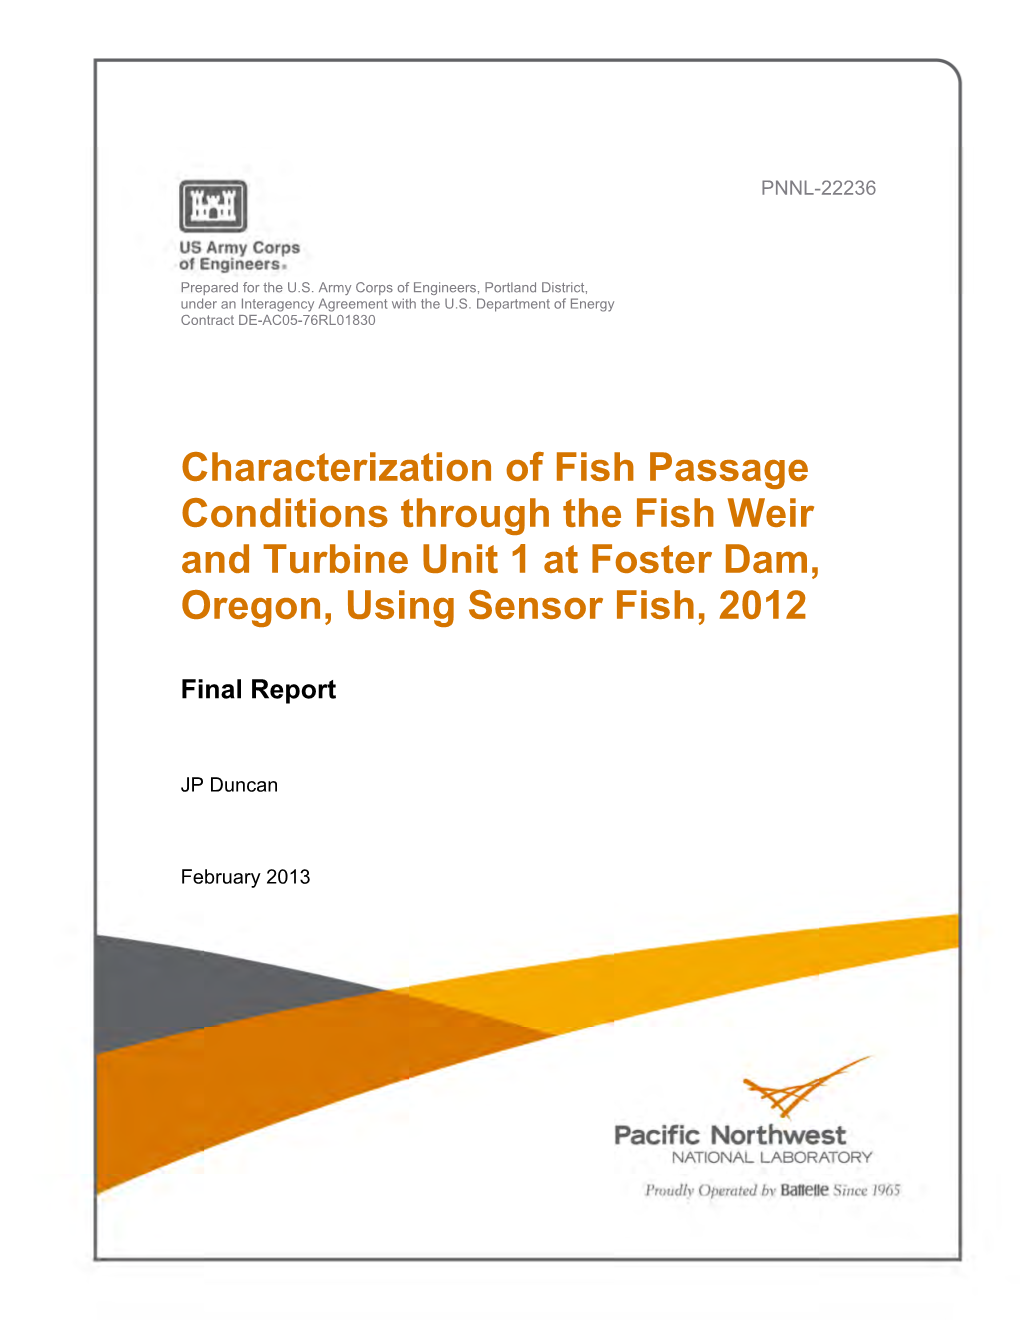 Characterization of Fish Passage Conditions Through the Fish Weir and Turbine Unit 1 at Foster Dam, Oregon, Using Sensor Fish, 2012